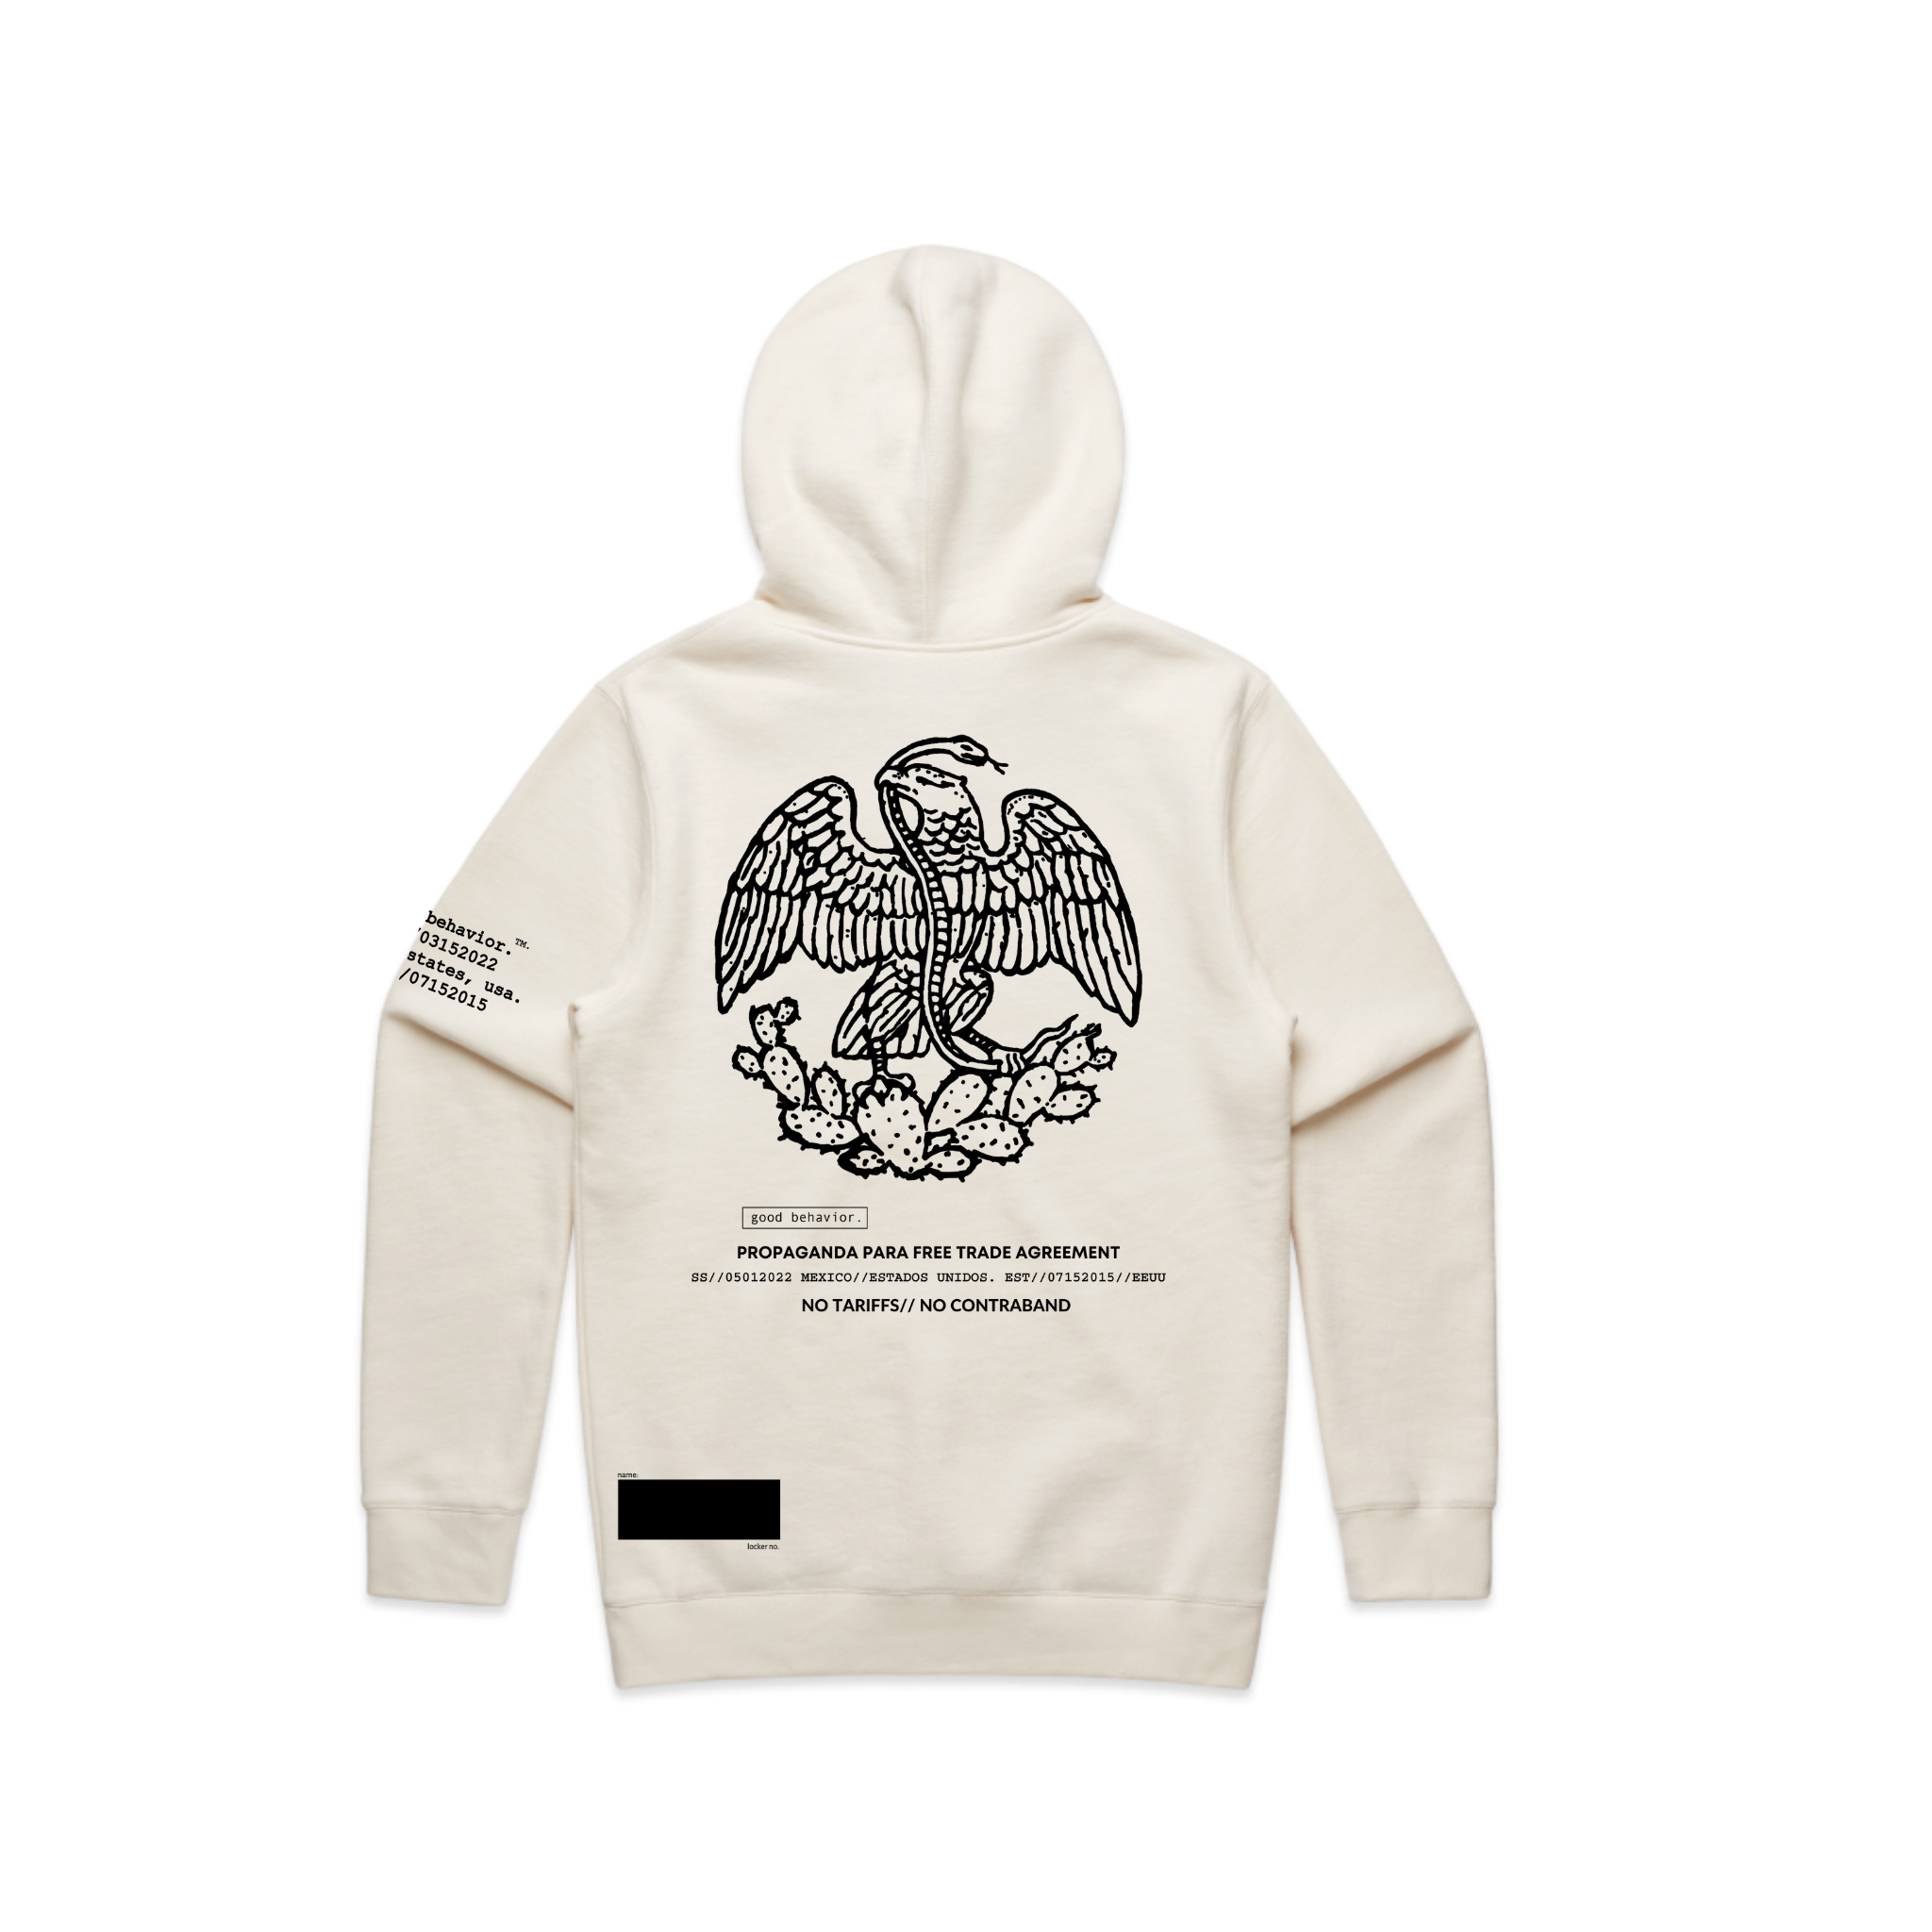 mexican eagle hoodie//